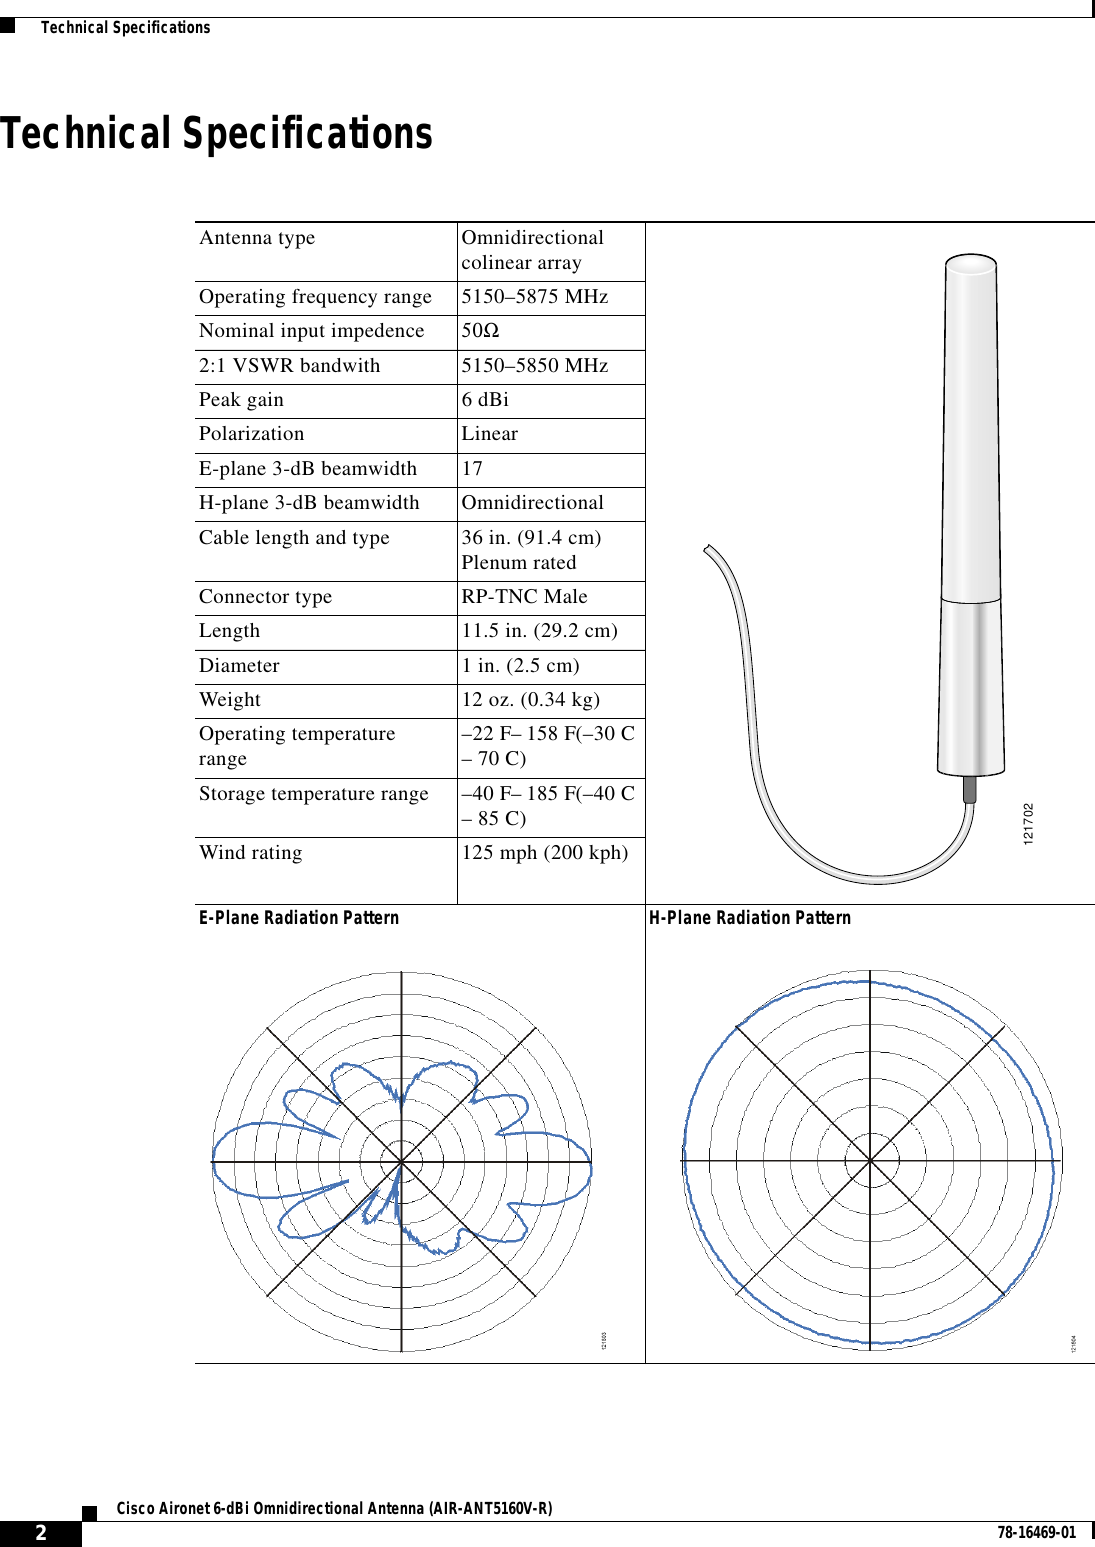 2Cisco Aironet 6-dBi Omnidirectional Antenna (AIR-ANT5160V-R) 78-16469-01  Technical SpecificationsTechnical SpecificationsAntenna type Omnidirectionalcolinear arrayOperating frequency range 5150–5875 MHzNominal input impedence 50Ω2:1 VSWR bandwith 5150–5850 MHzPeak gain 6 dBiPolarization LinearE-plane 3-dB beamwidth 17H-plane 3-dB beamwidth OmnidirectionalCable length and type 36 in. (91.4 cm)Plenum ratedConnector type RP-TNC MaleLength 11.5 in. (29.2 cm)Diameter 1 in. (2.5 cm)Weight 12 oz. (0.34 kg)Operating temperaturerange –22 F– 158 F(–30 C– 70 C)Storage temperature range –40 F– 185 F(–40 C– 85 C)Wind rating 125 mph (200 kph)E-Plane Radiation Pattern H-Plane Radiation Pattern121702